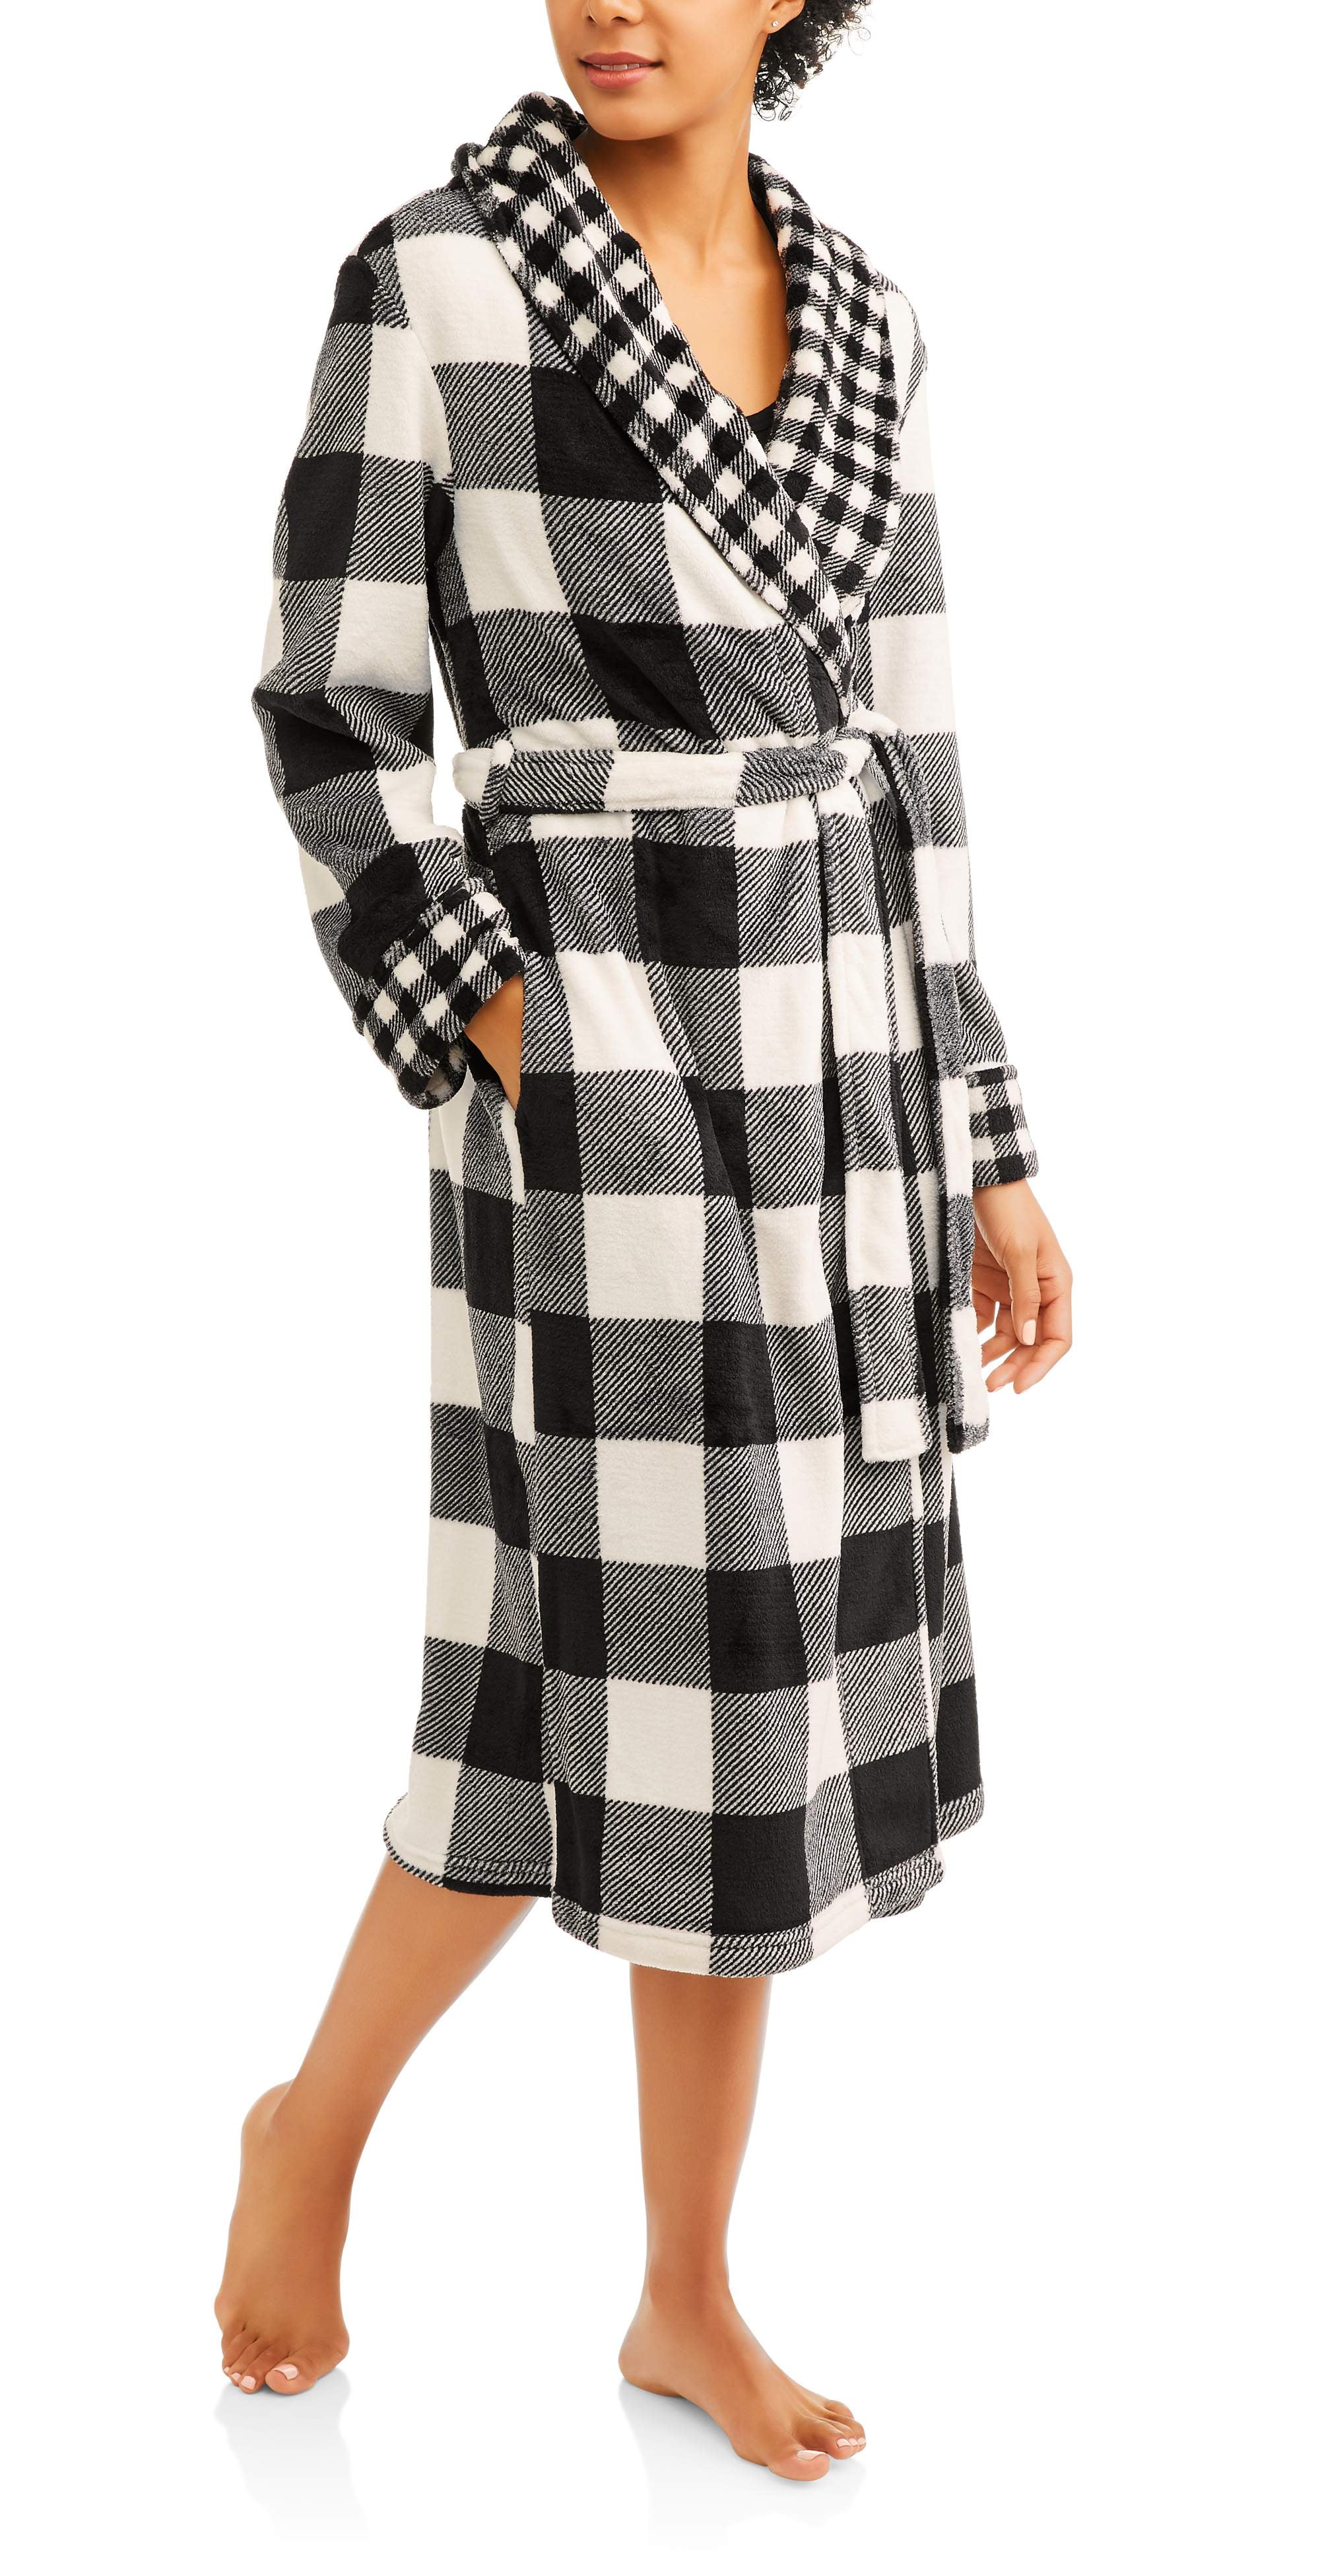 Super Soft Minky Ladies Robe by Love and Lace 